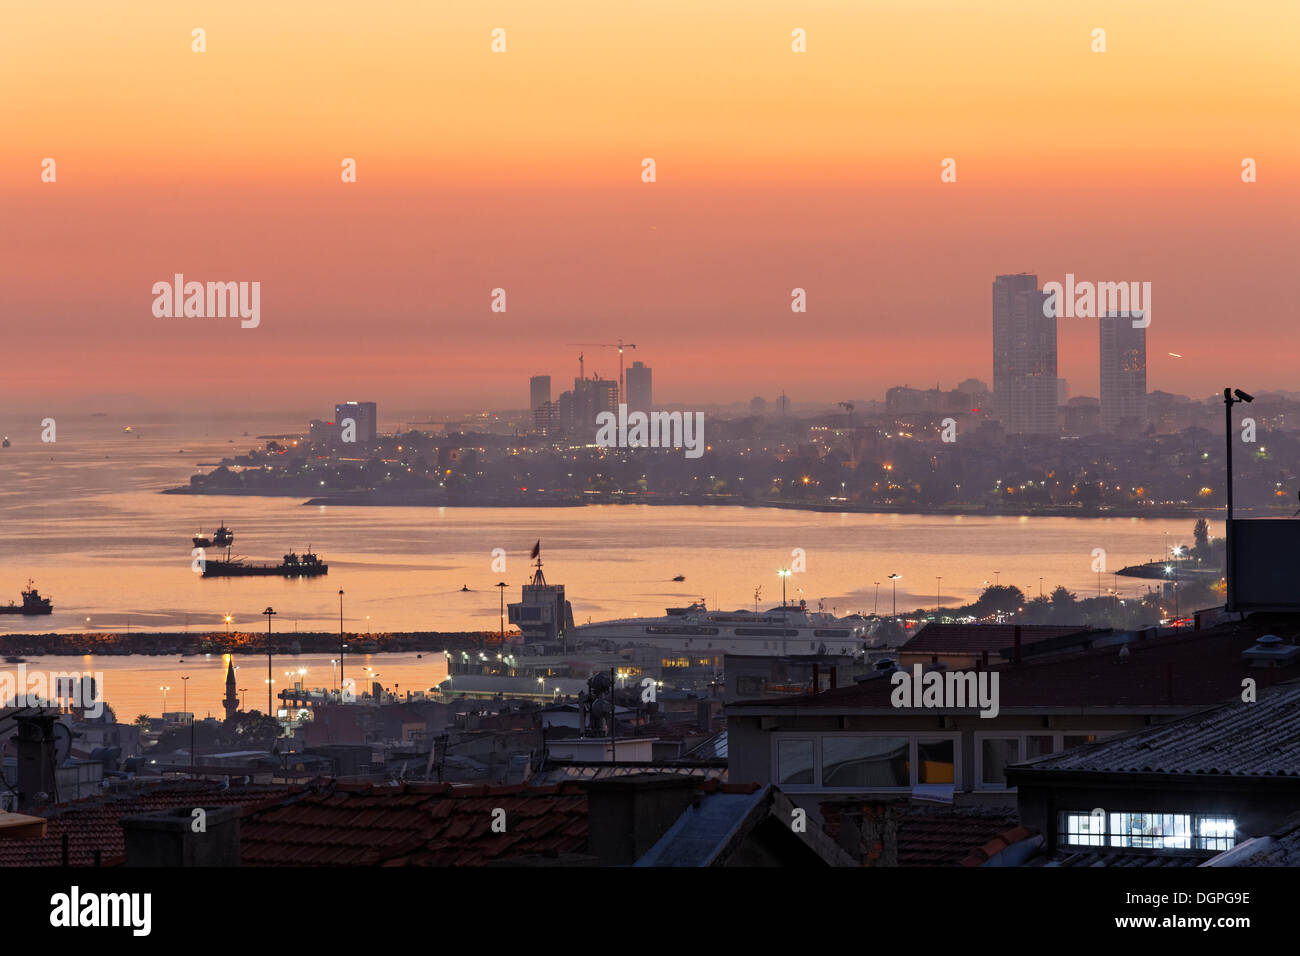 Evening mood on the shore of the Marmara Sea, view from Old City Sultanahmet, Istanbul, Turkey, Europe Stock Photo